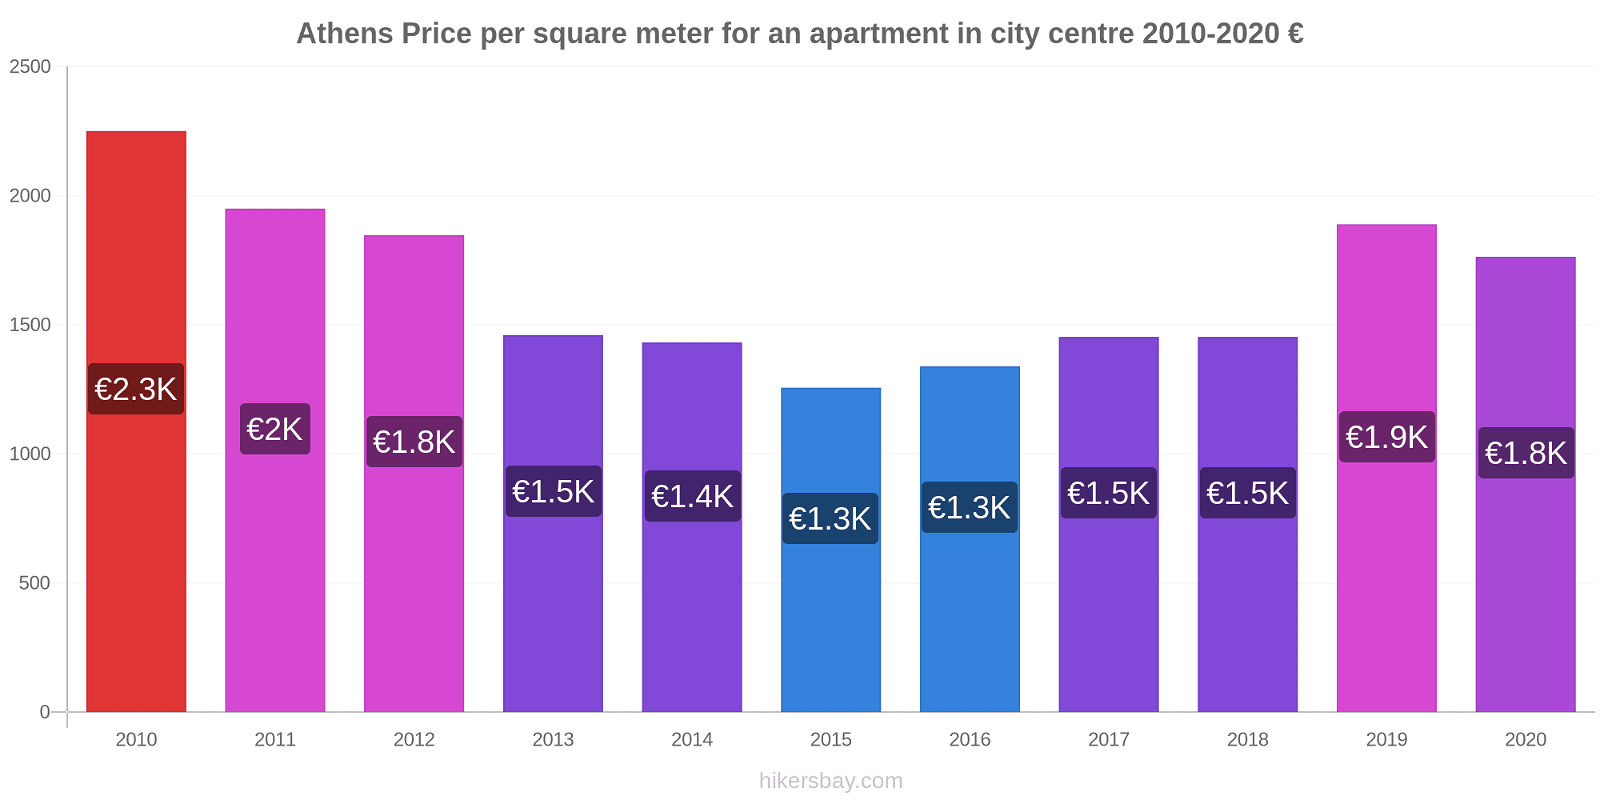 Athens price changes Price per square meter for an apartment in city centre hikersbay.com